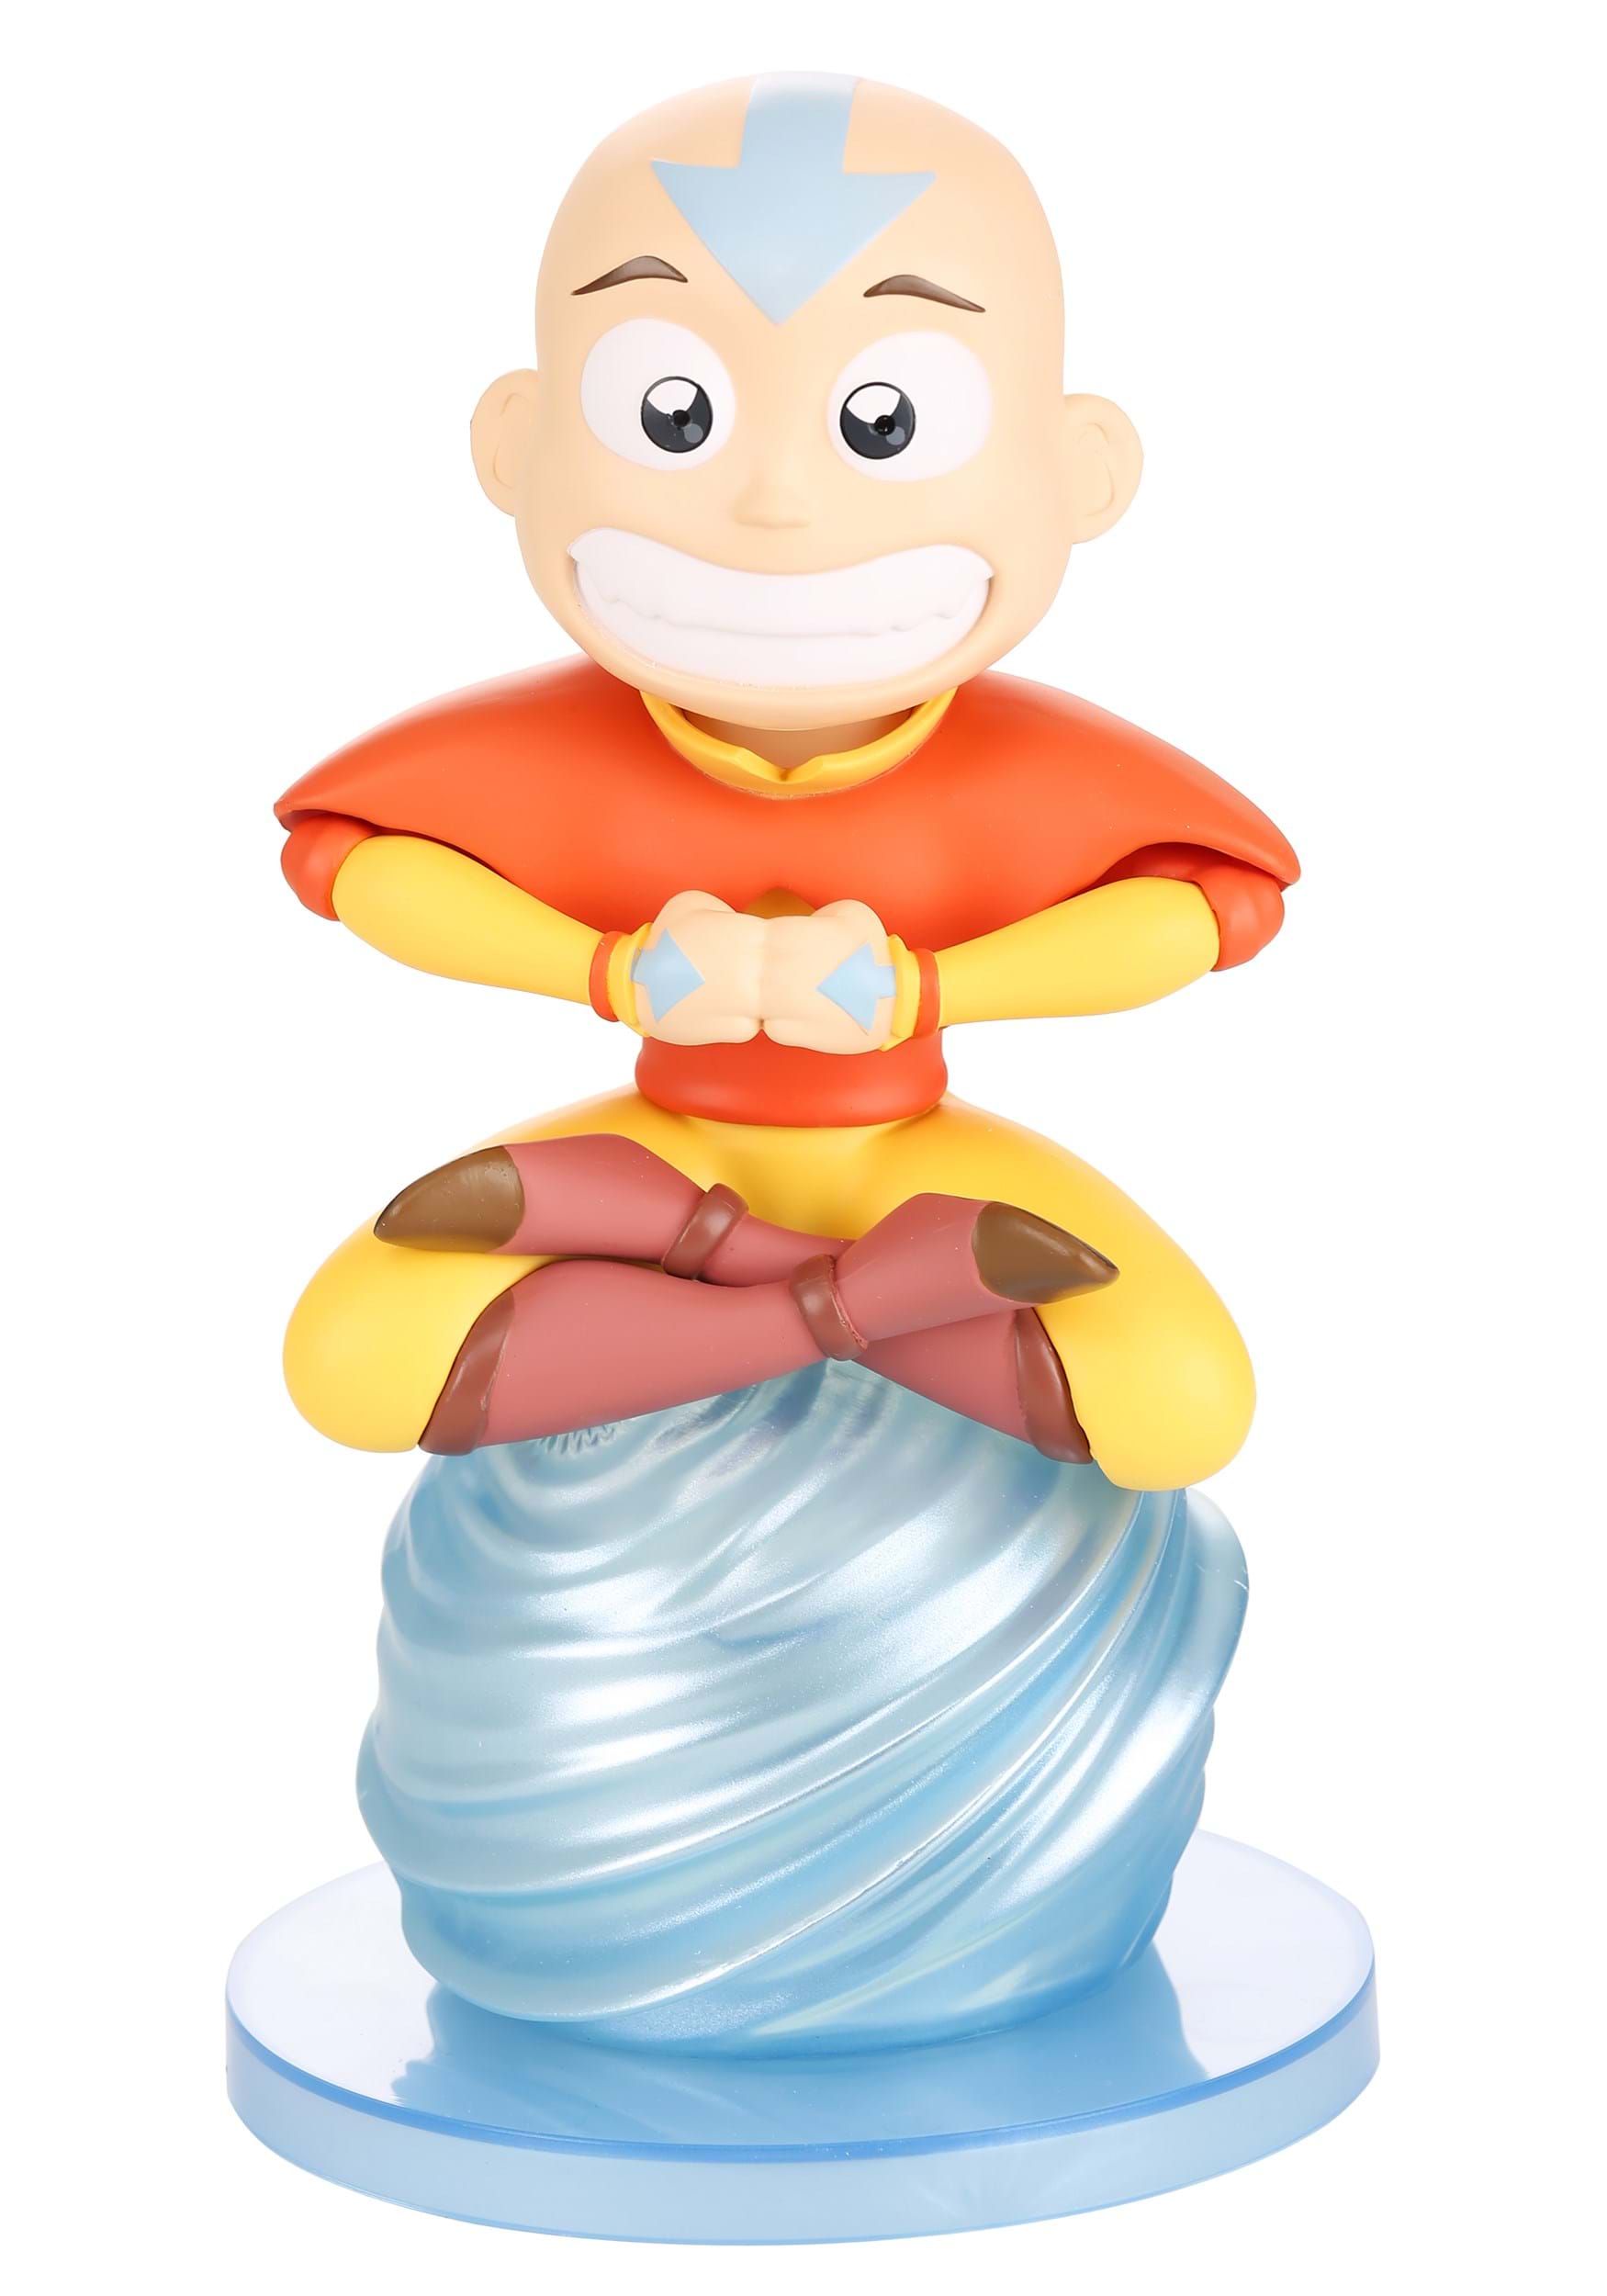 Avatar the Last Airbender Aang 8" Garden Gnome